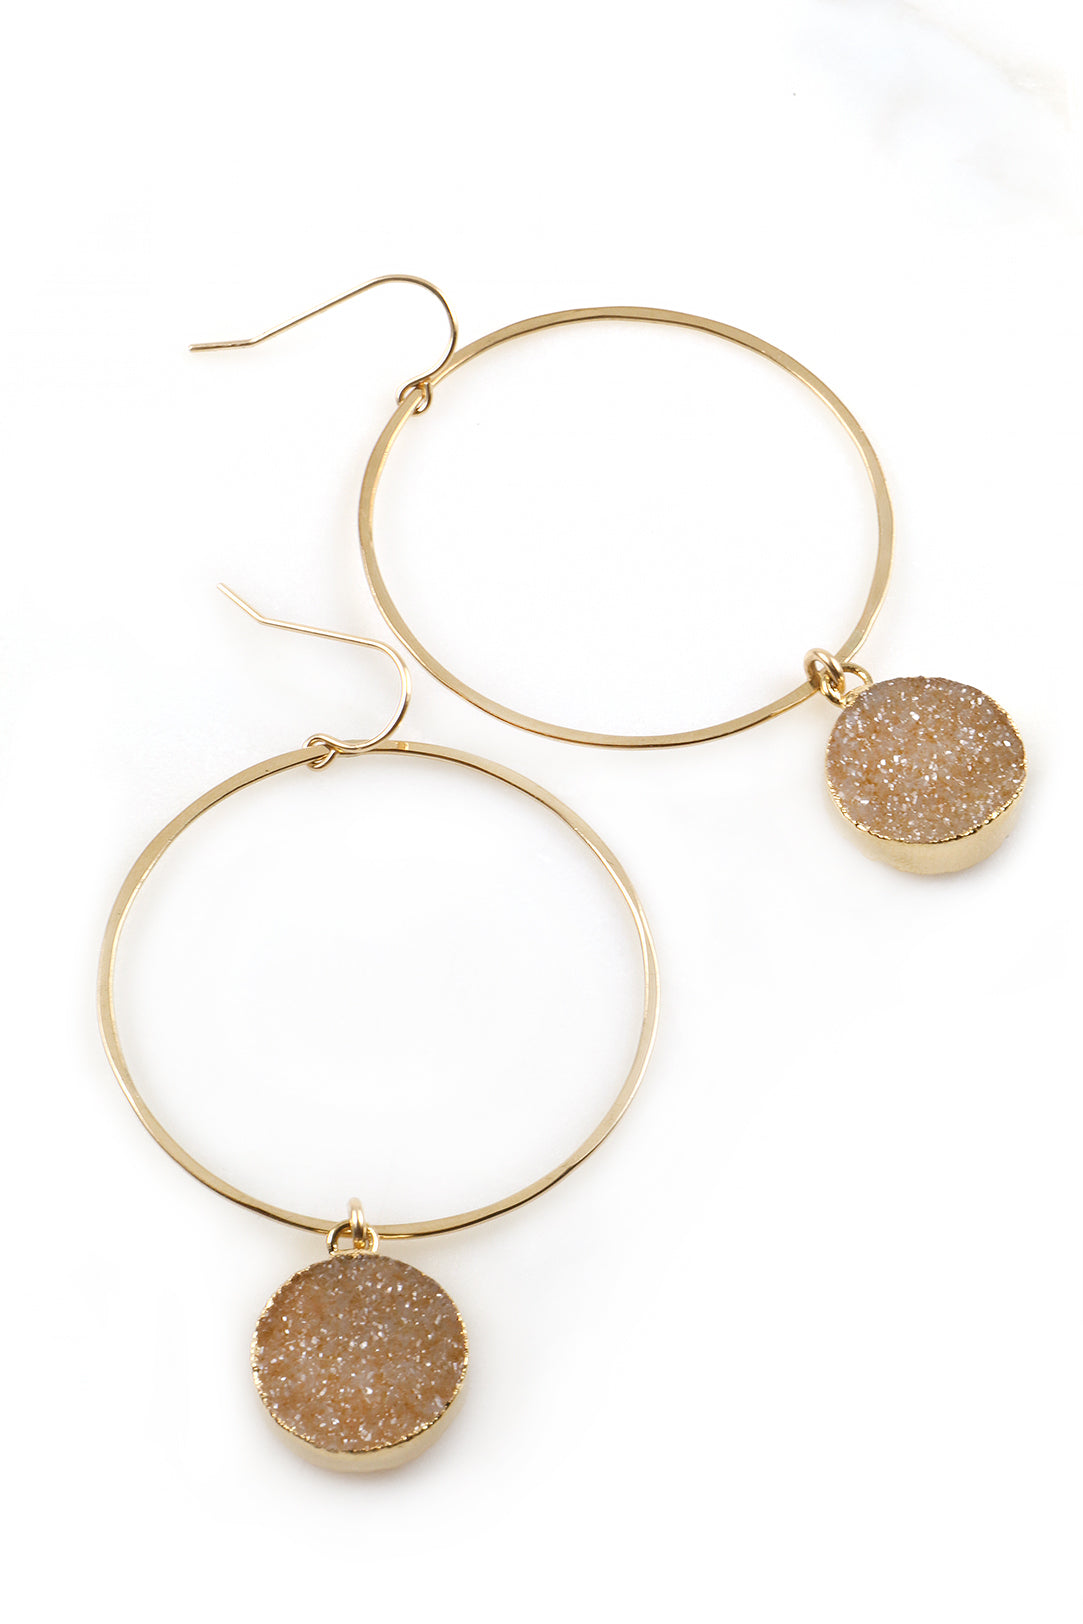 Hammered Gold Hoop Earrings with Round Druzy